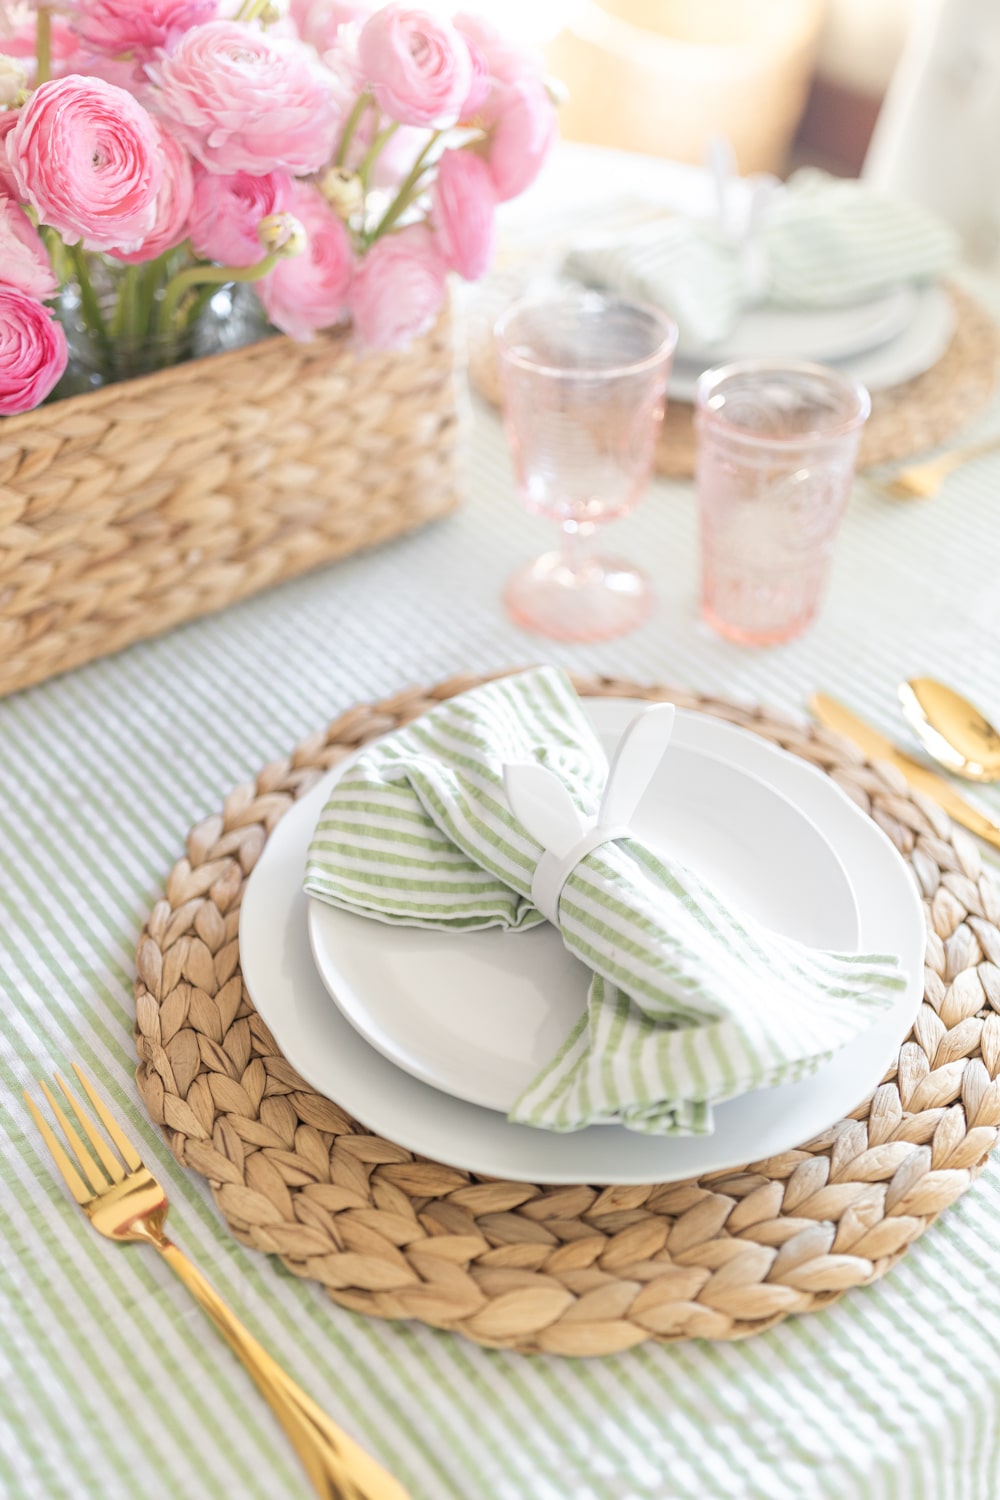 Simple Easter table decor ideas from blogger Stephanie Ziajka on Diary of a Debutante